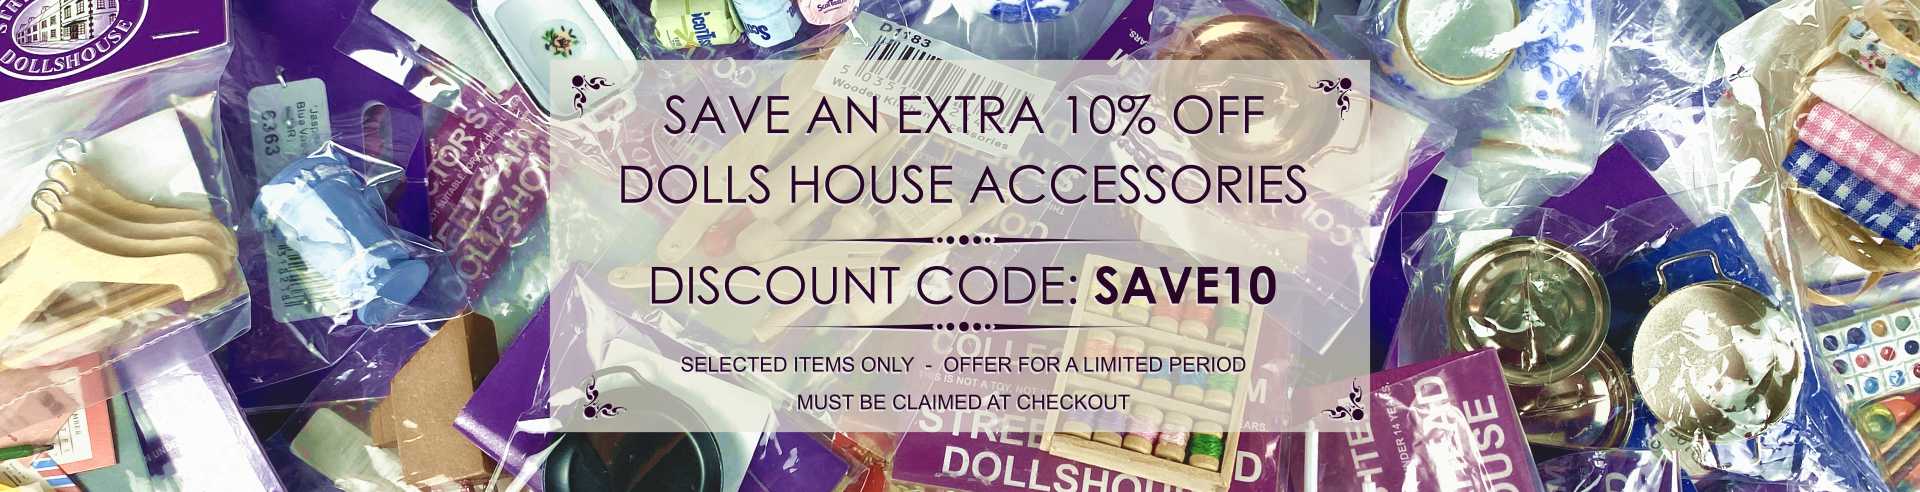 Dolls house accessories discount